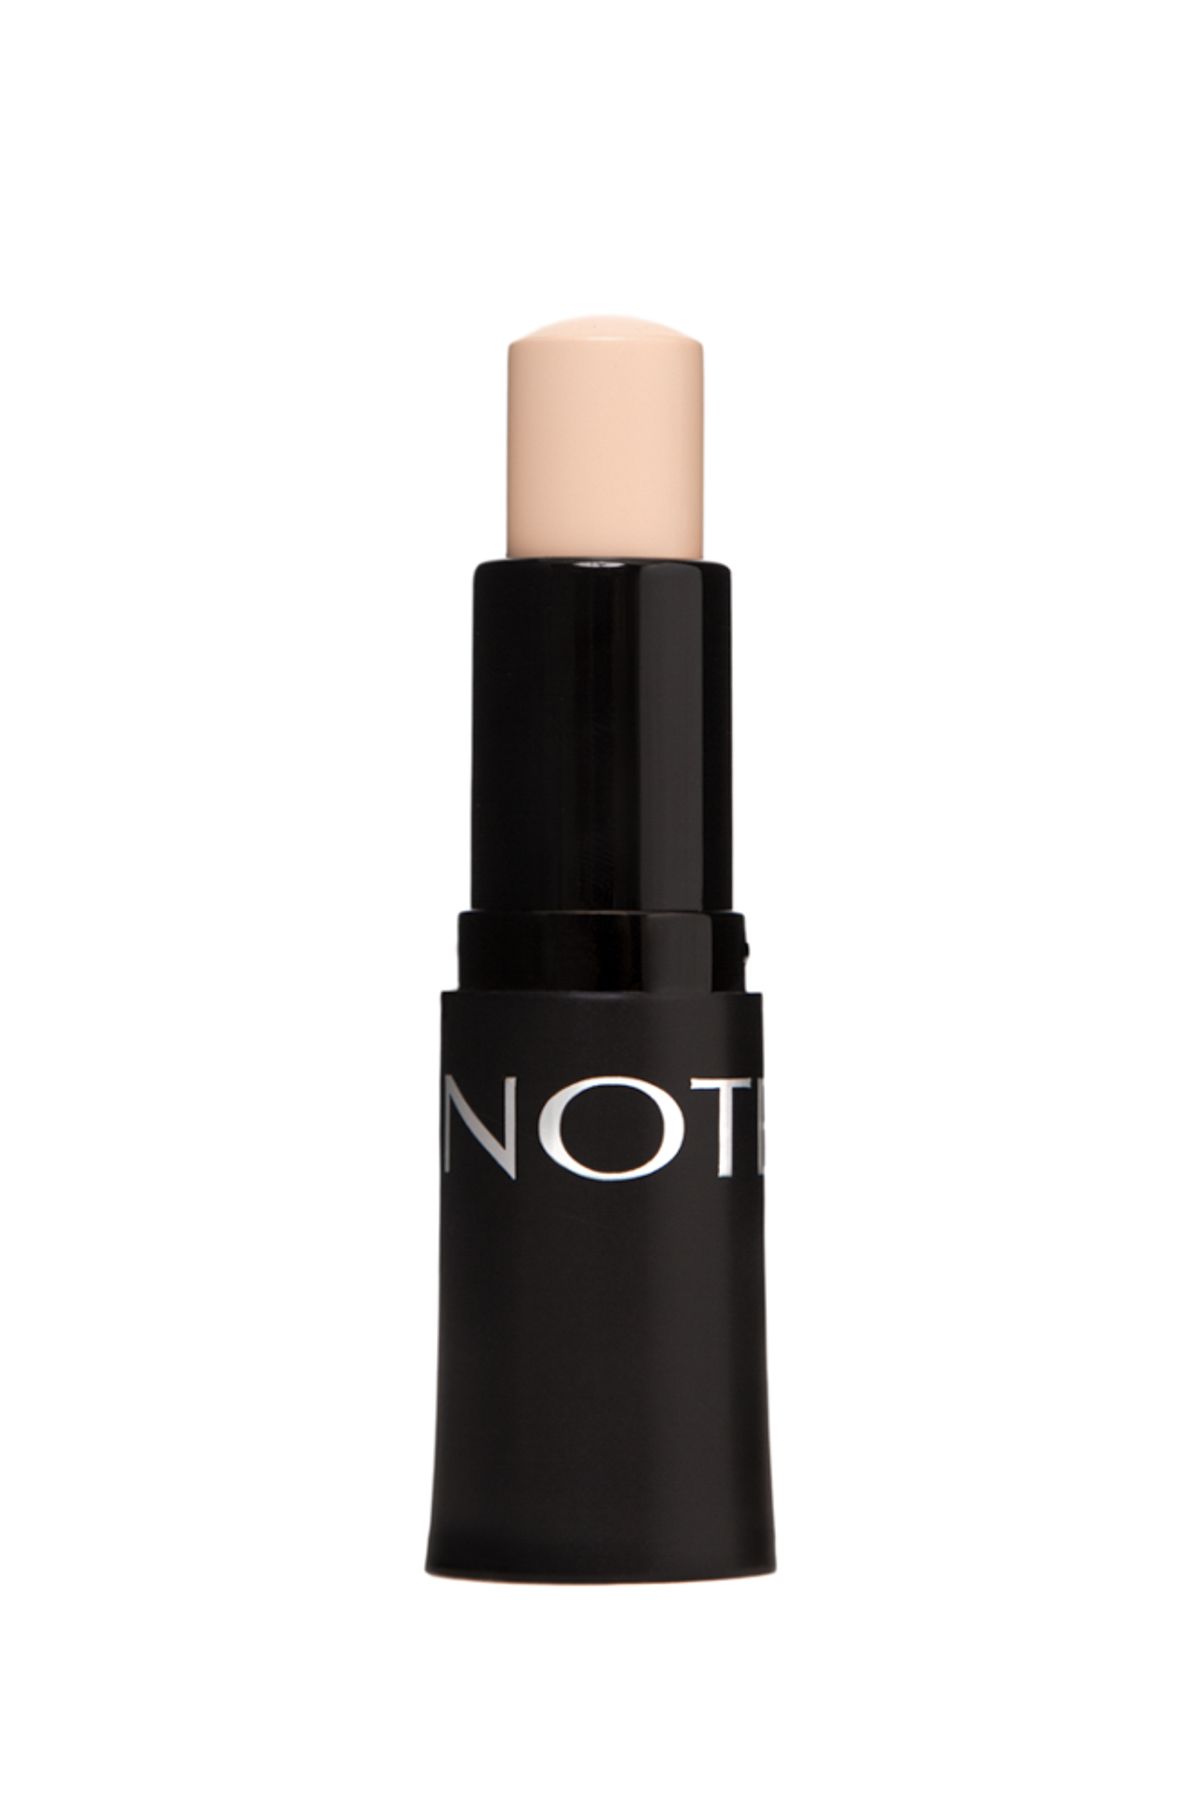 Note Cosmetics Full Coverage Stıck Concealer 04